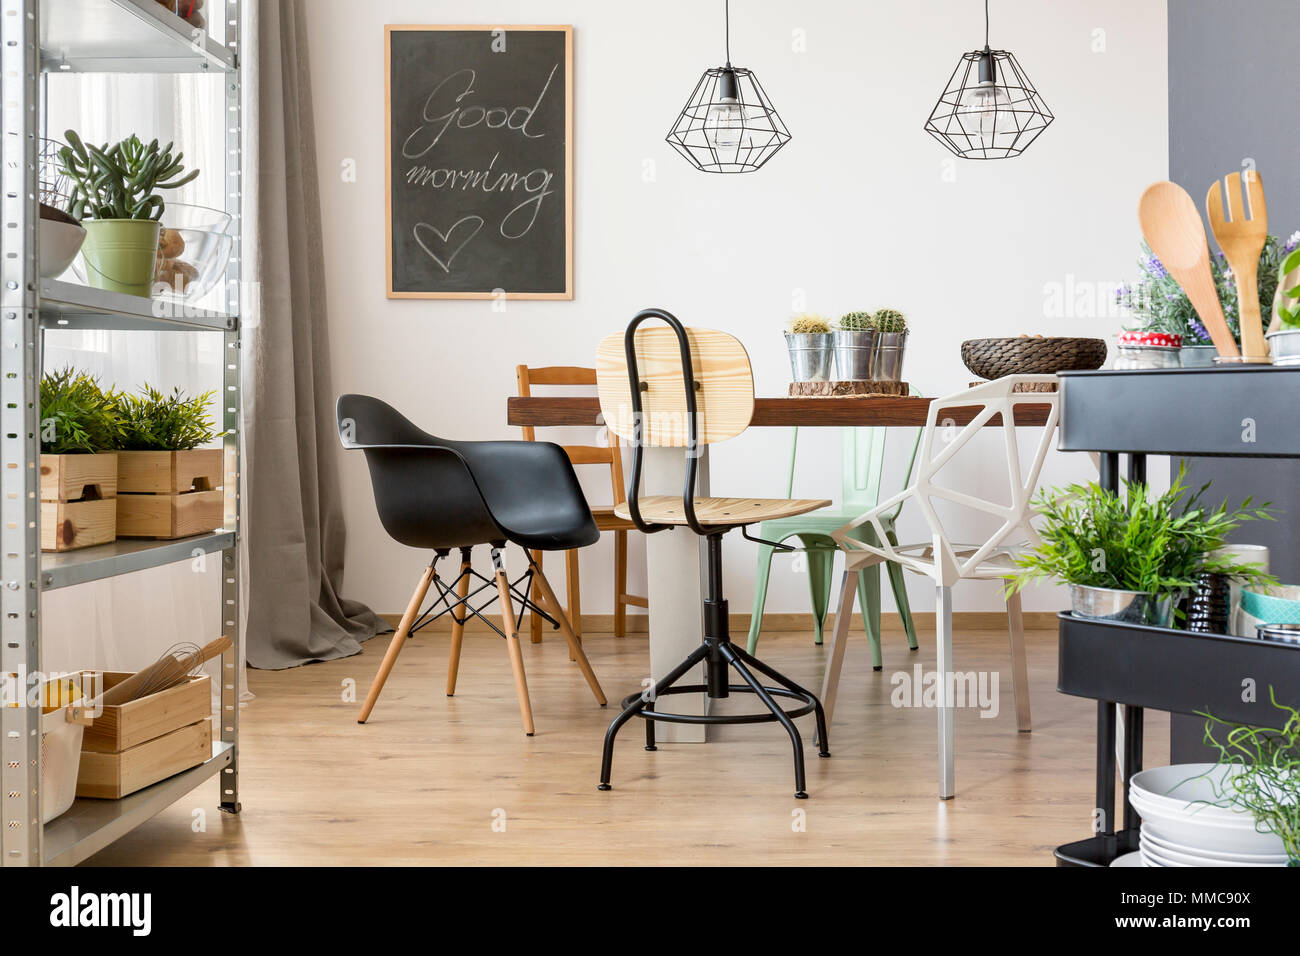 Dining room with modern chairs, table and simple regale Stock Photo